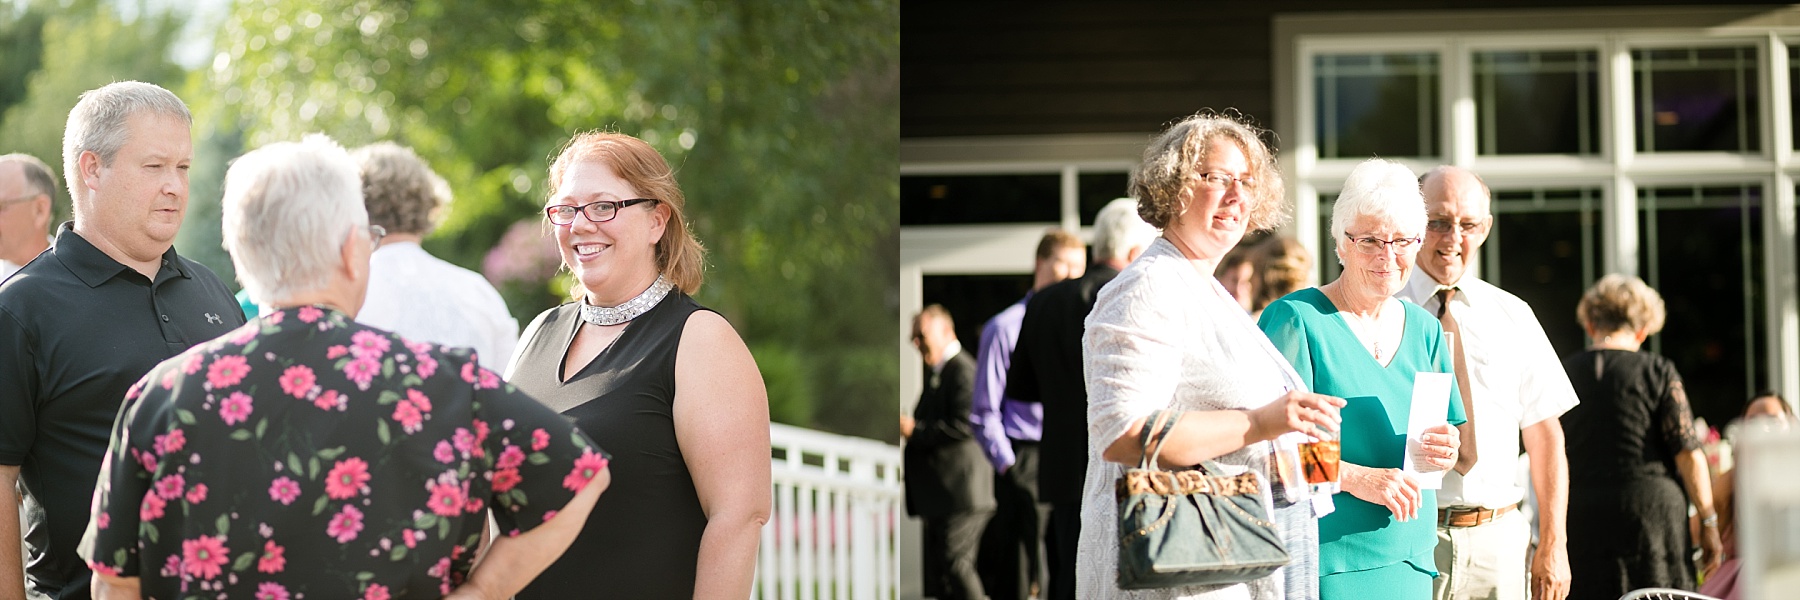 A summer garden fete for a pair of lovebirds. Sarah & Kyle were married at the Florian Gardens in Eau Claire.